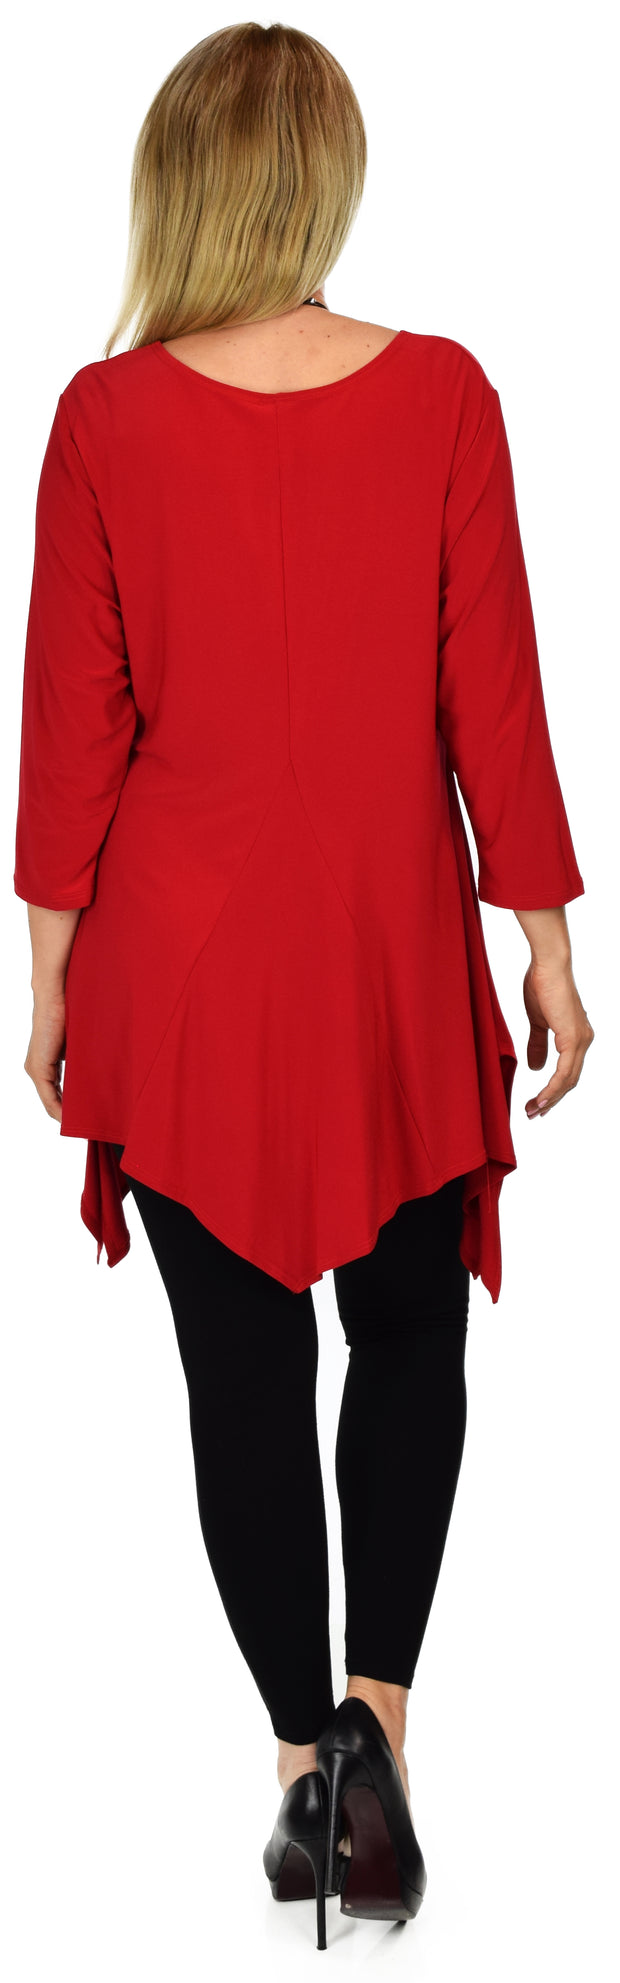 Dare2bstylish Swingy Love Bug Plus size tunic for Travel and Much More. M to 3XL, RedTunic